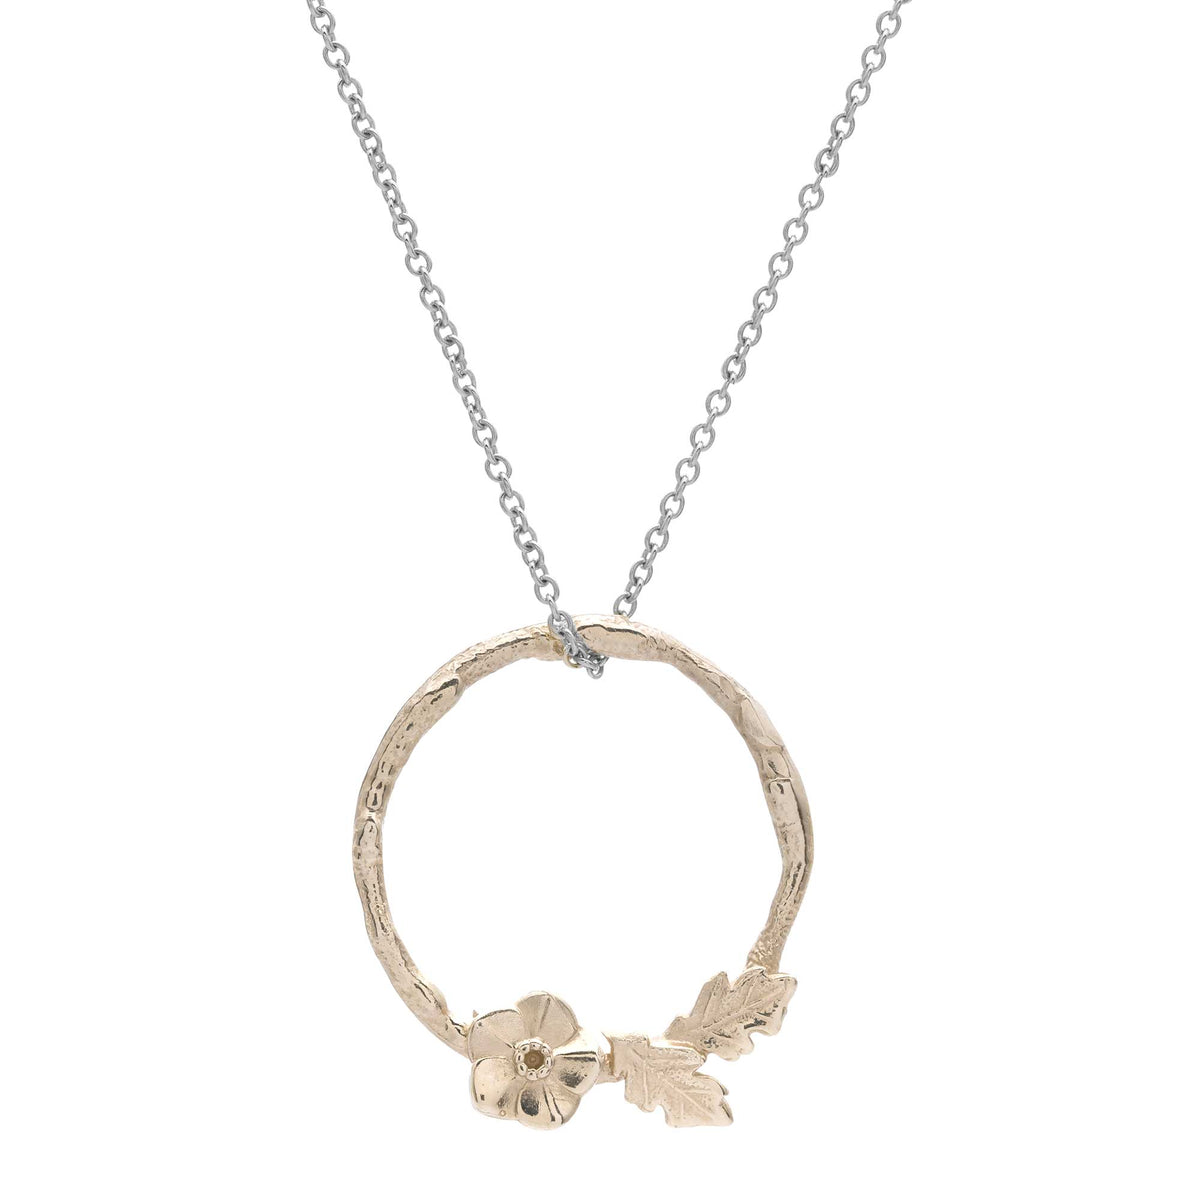 Forget me not wreath silver and gold necklace flower pendant RHS Chelsea Flower Show